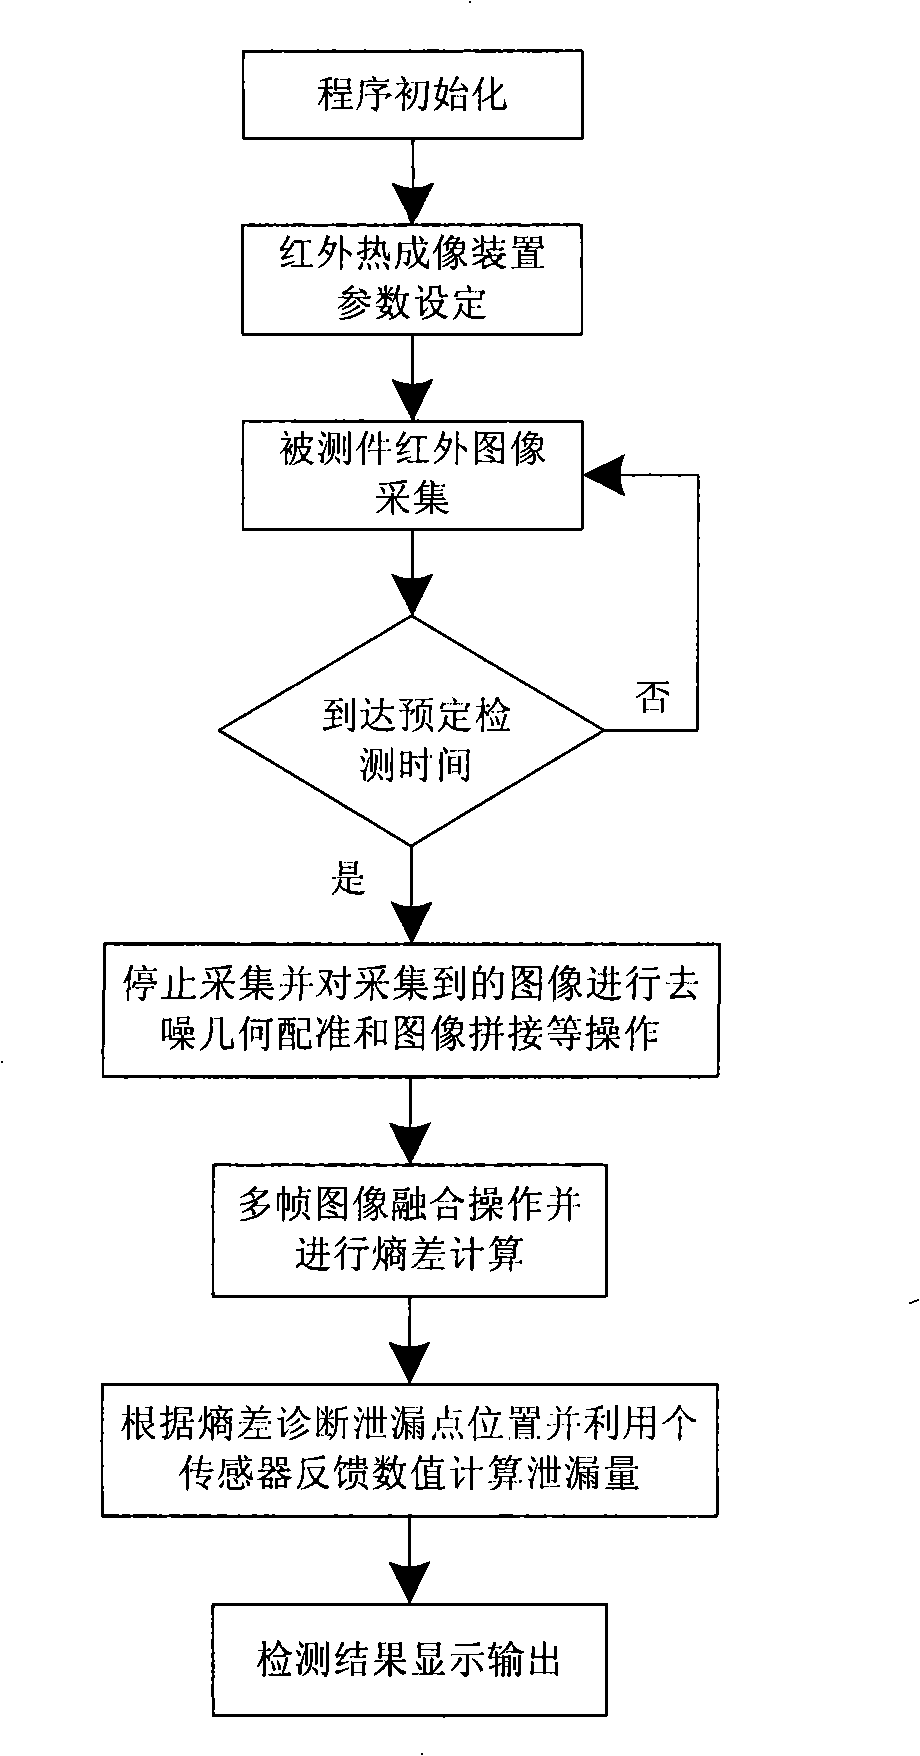 Method and system for detecting and positioning leakage based on infrared imaging technique